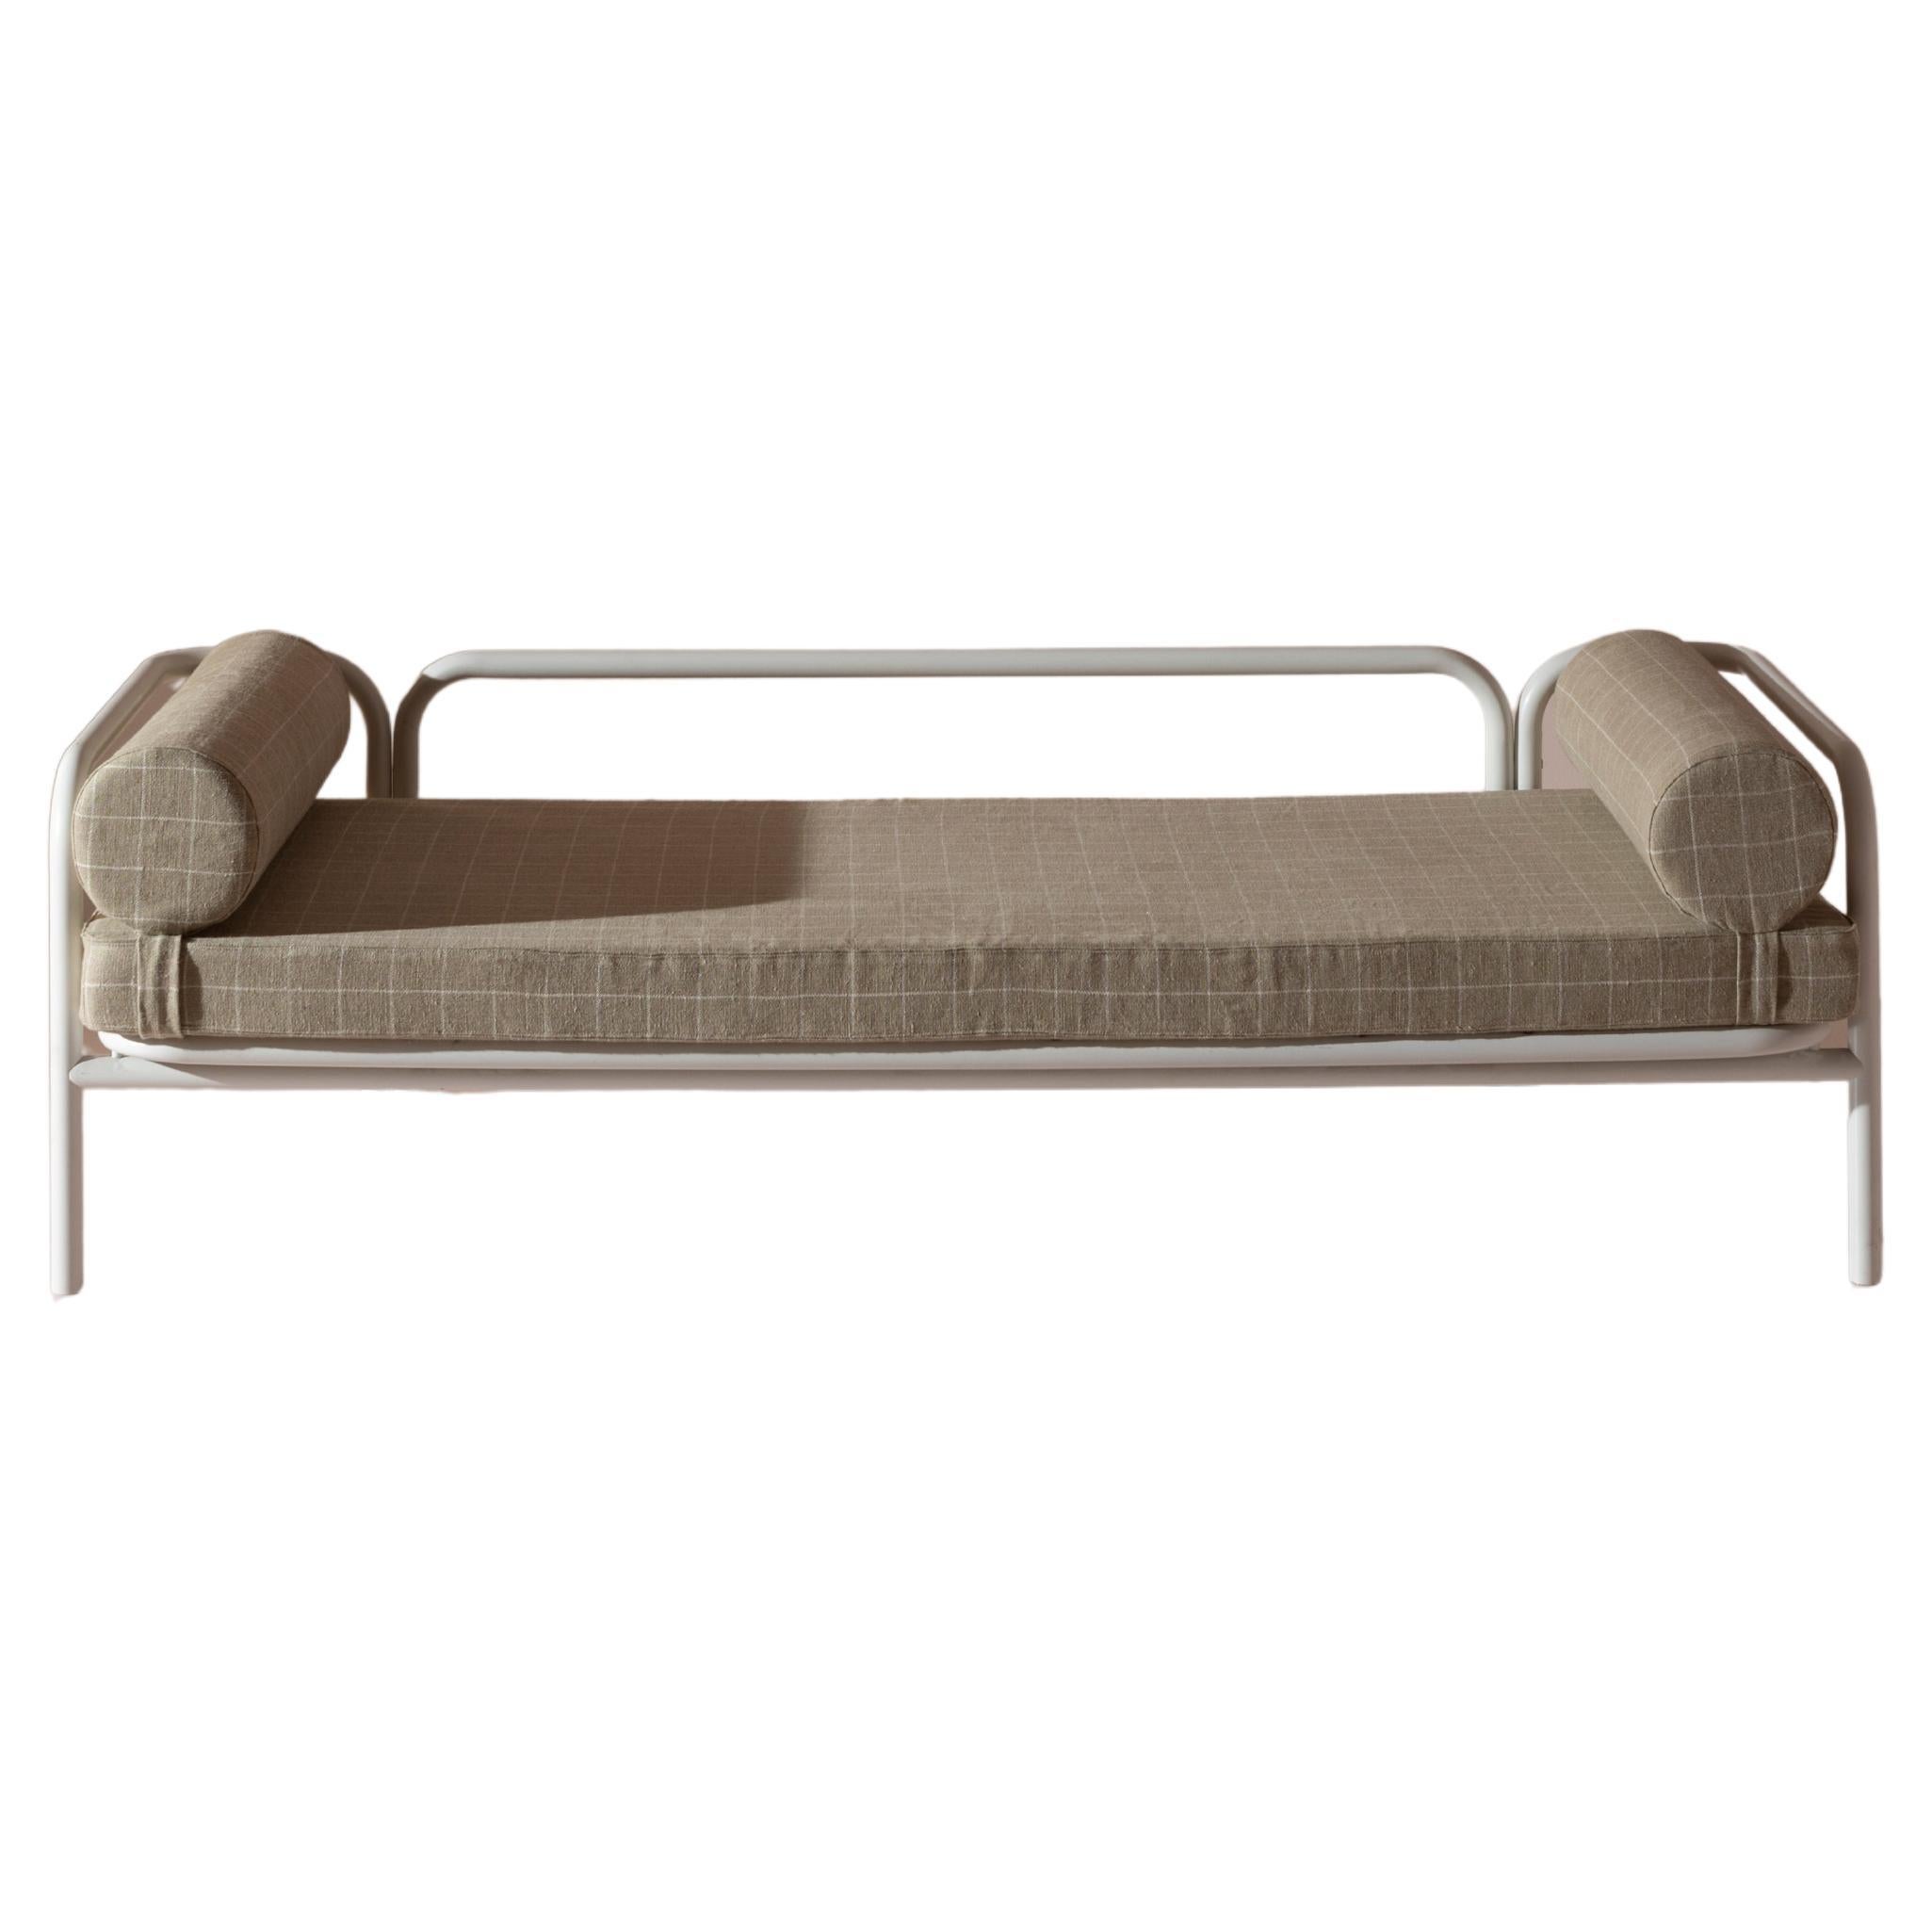 Gae Aulenti Locus Solus daybed for Poltronova, Italy, 1964 For Sale